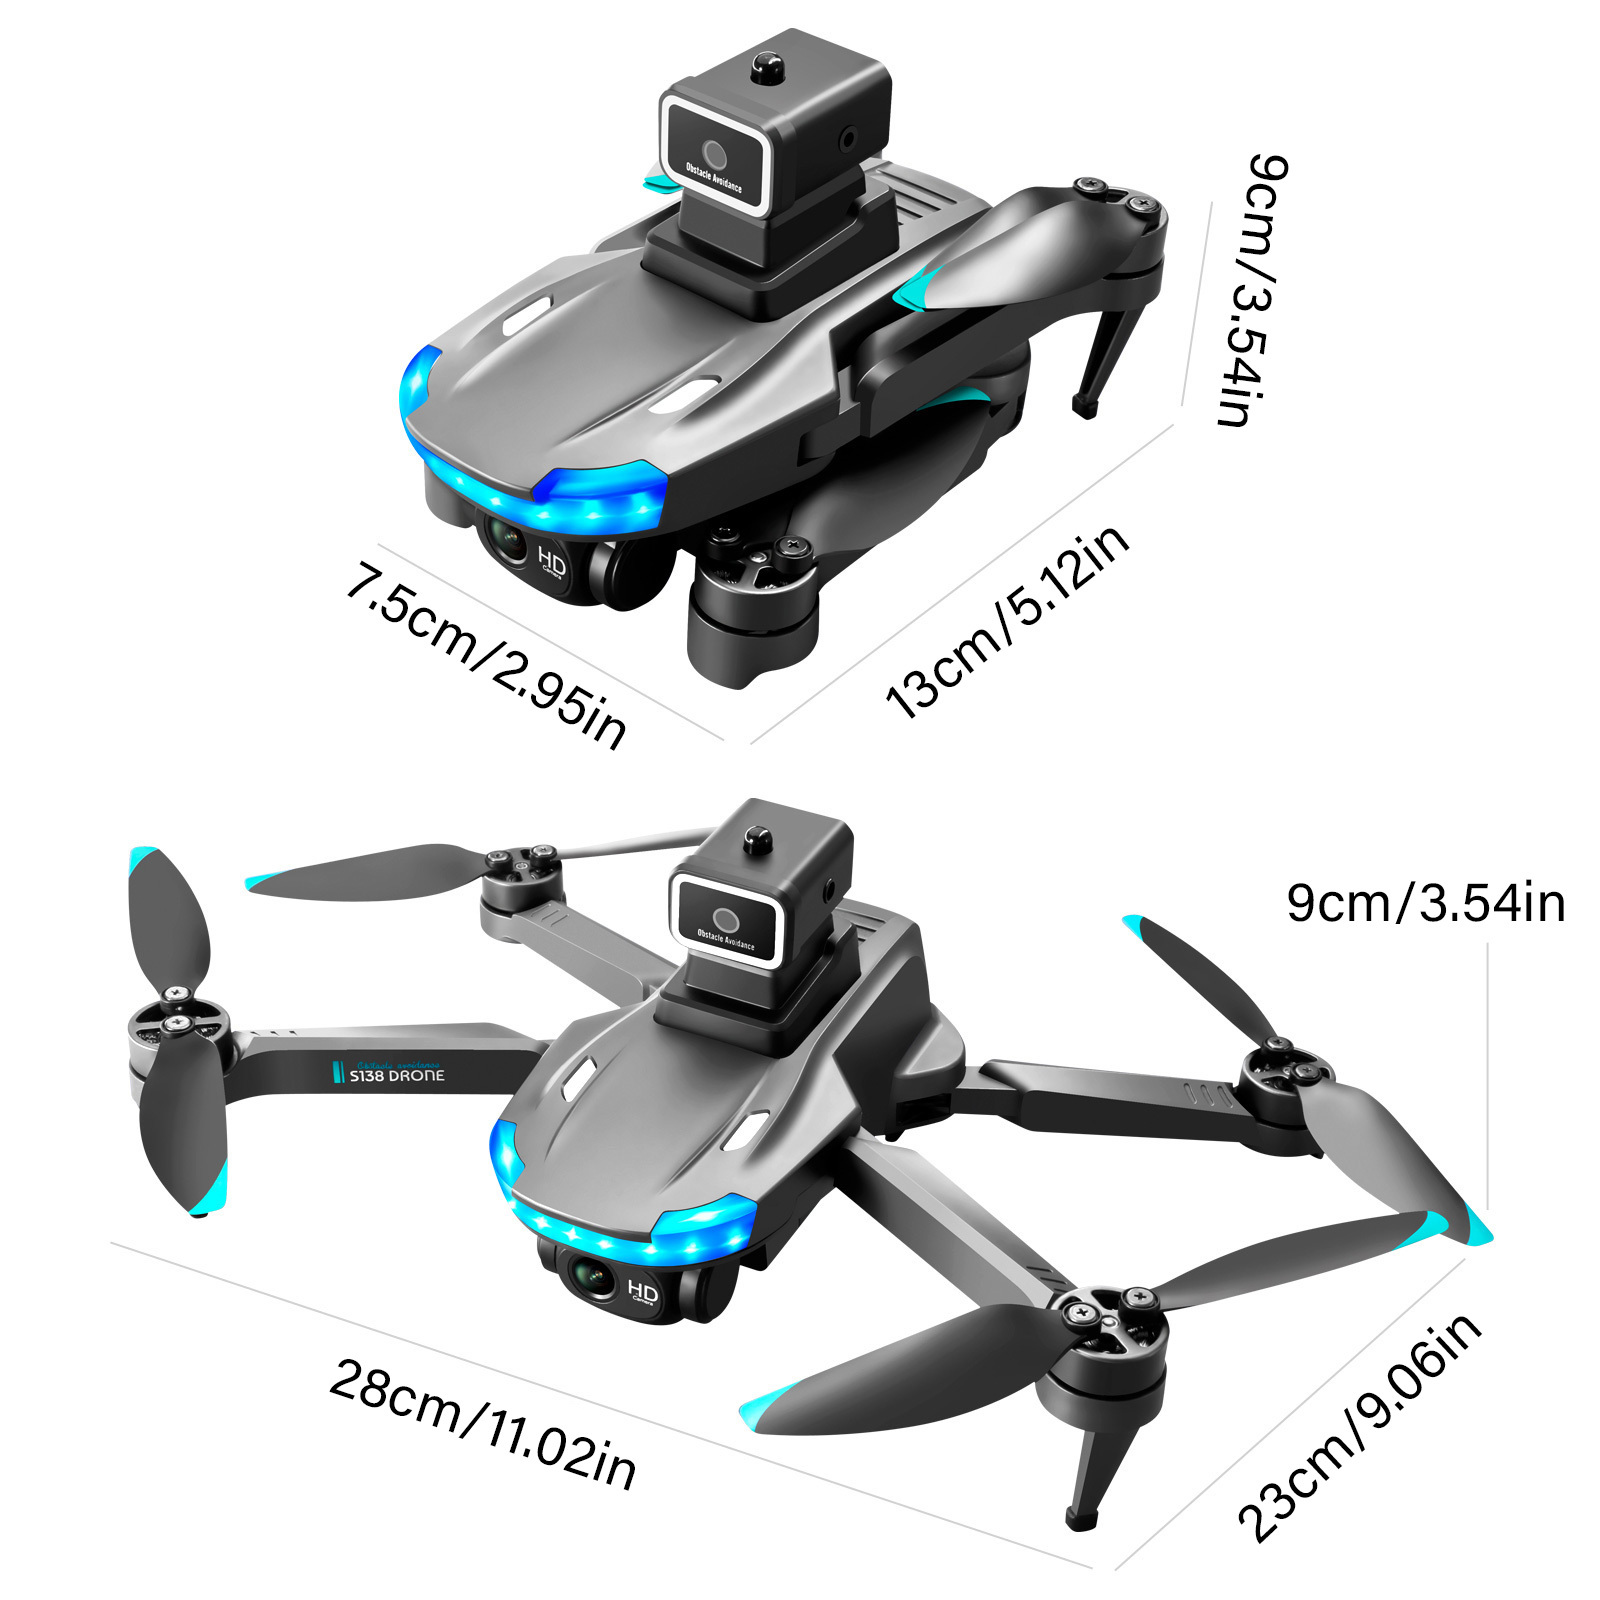 s138 foldable drone with auto avoid obstacles hd camera brushless motor live video gravity sensor gesture control optical flow positioning headless mode 3d flip rtf includes carrying bag details 21